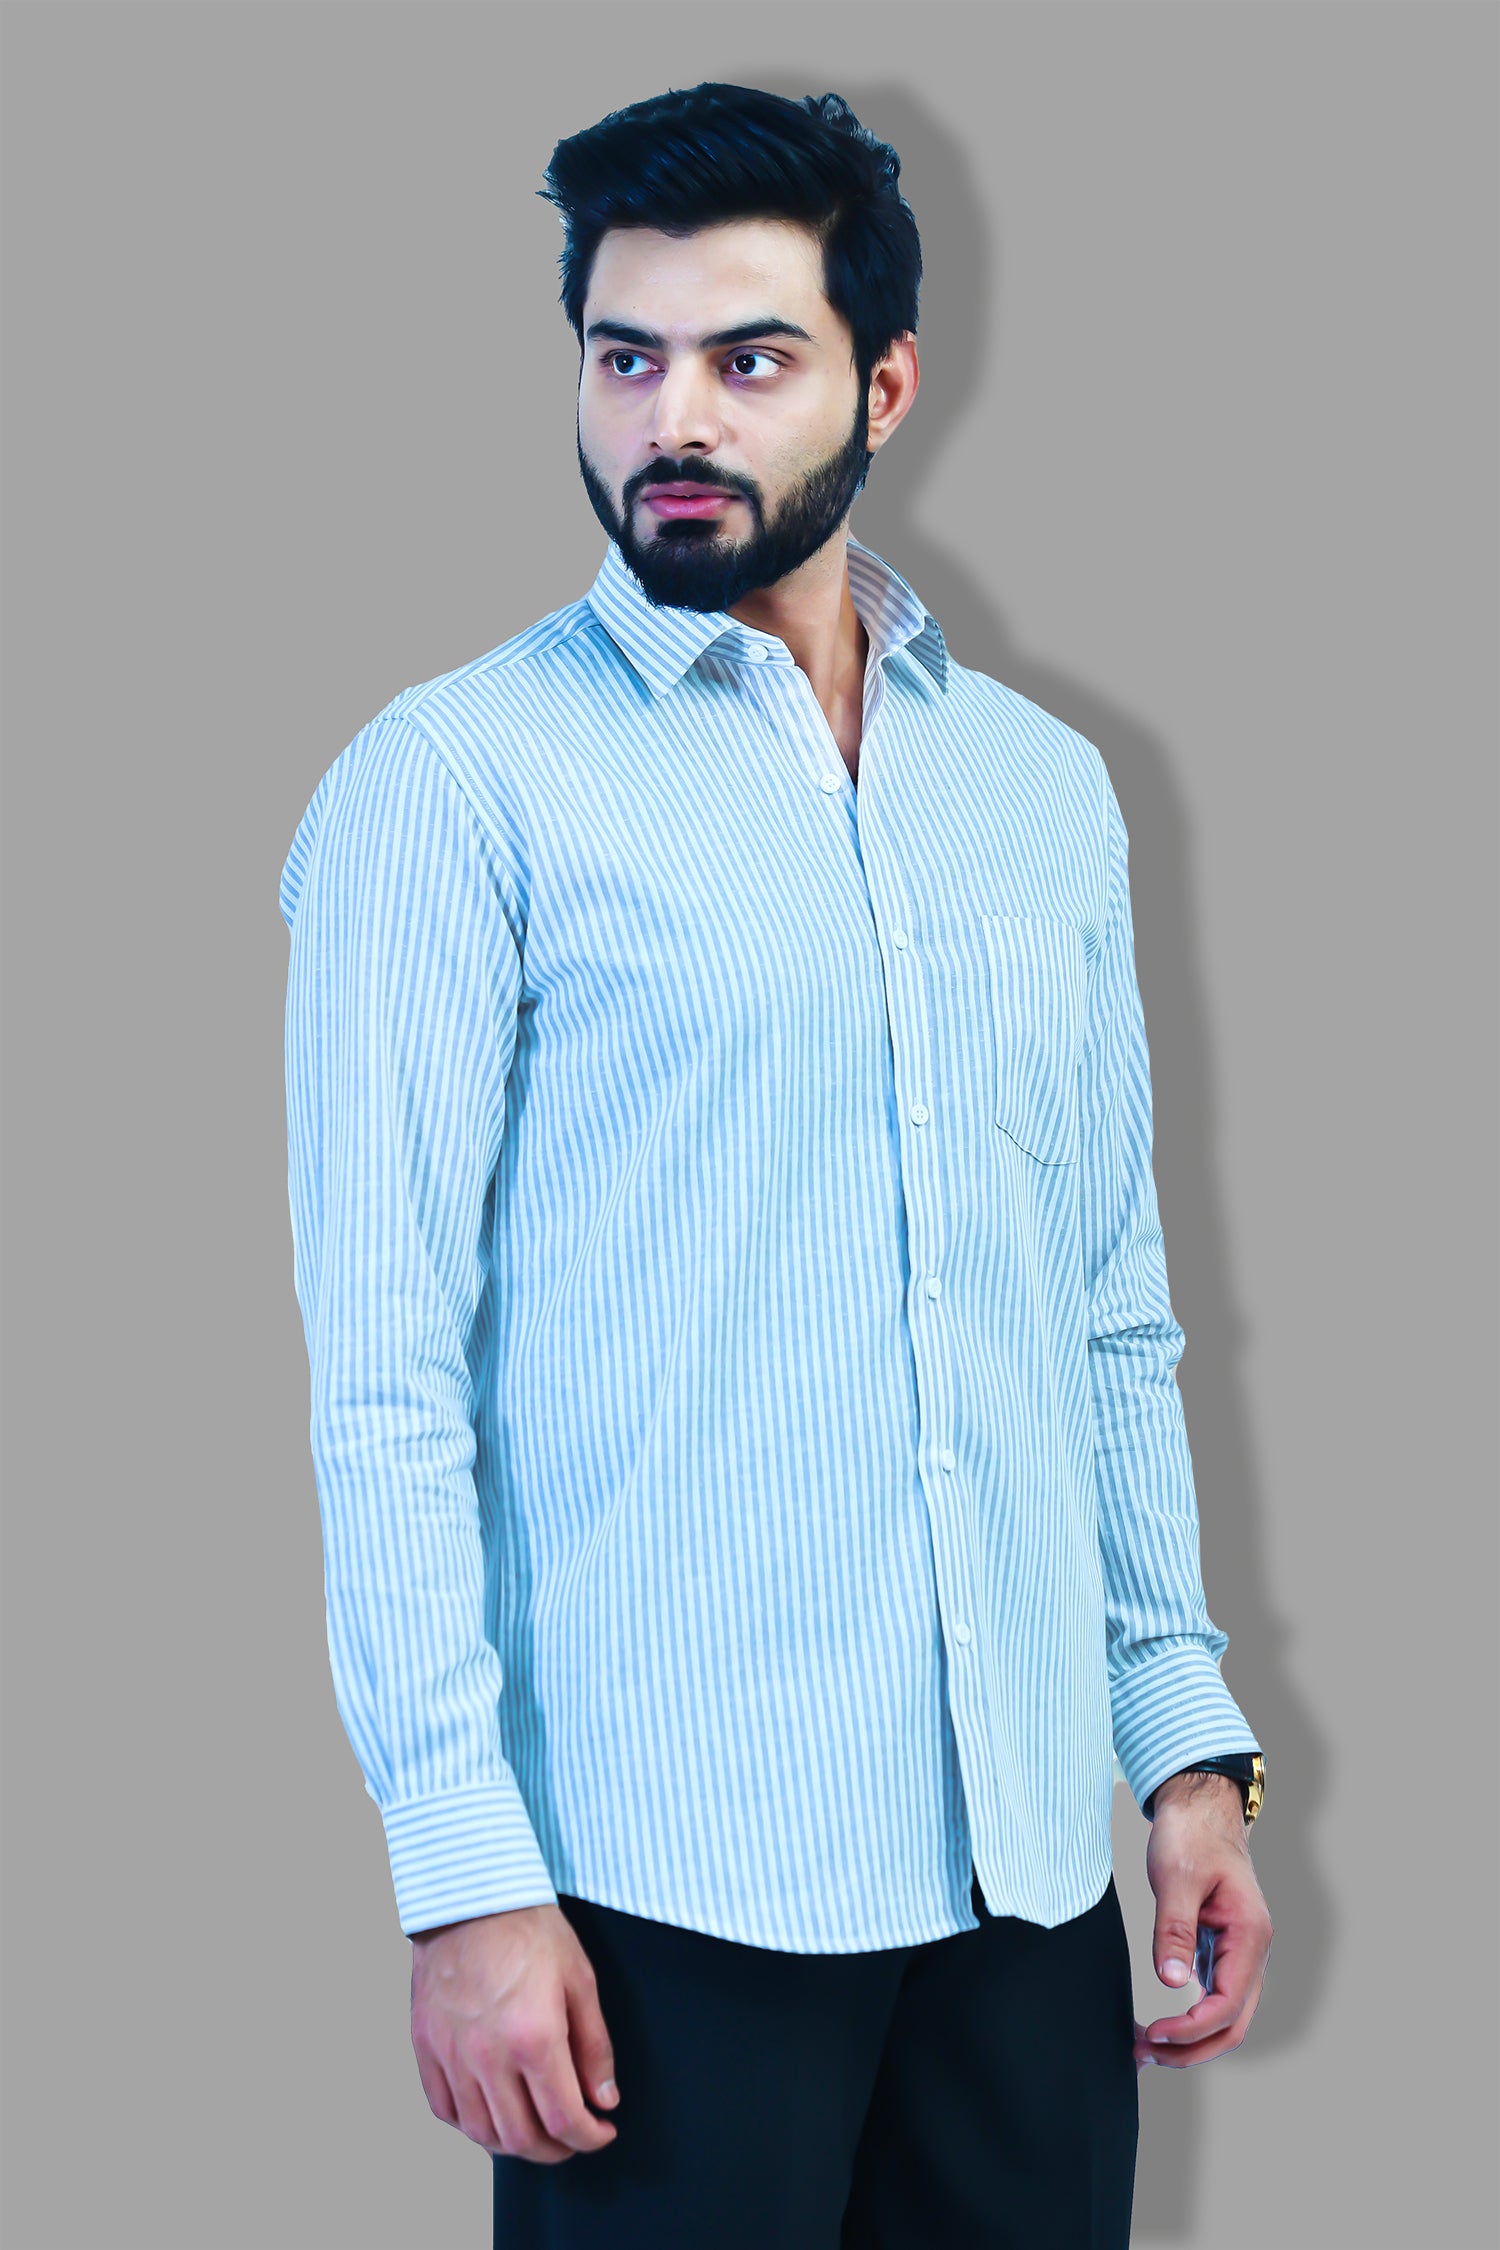 Veshbhoshaa's Bluebird Blue And White Formal Shirt For Men